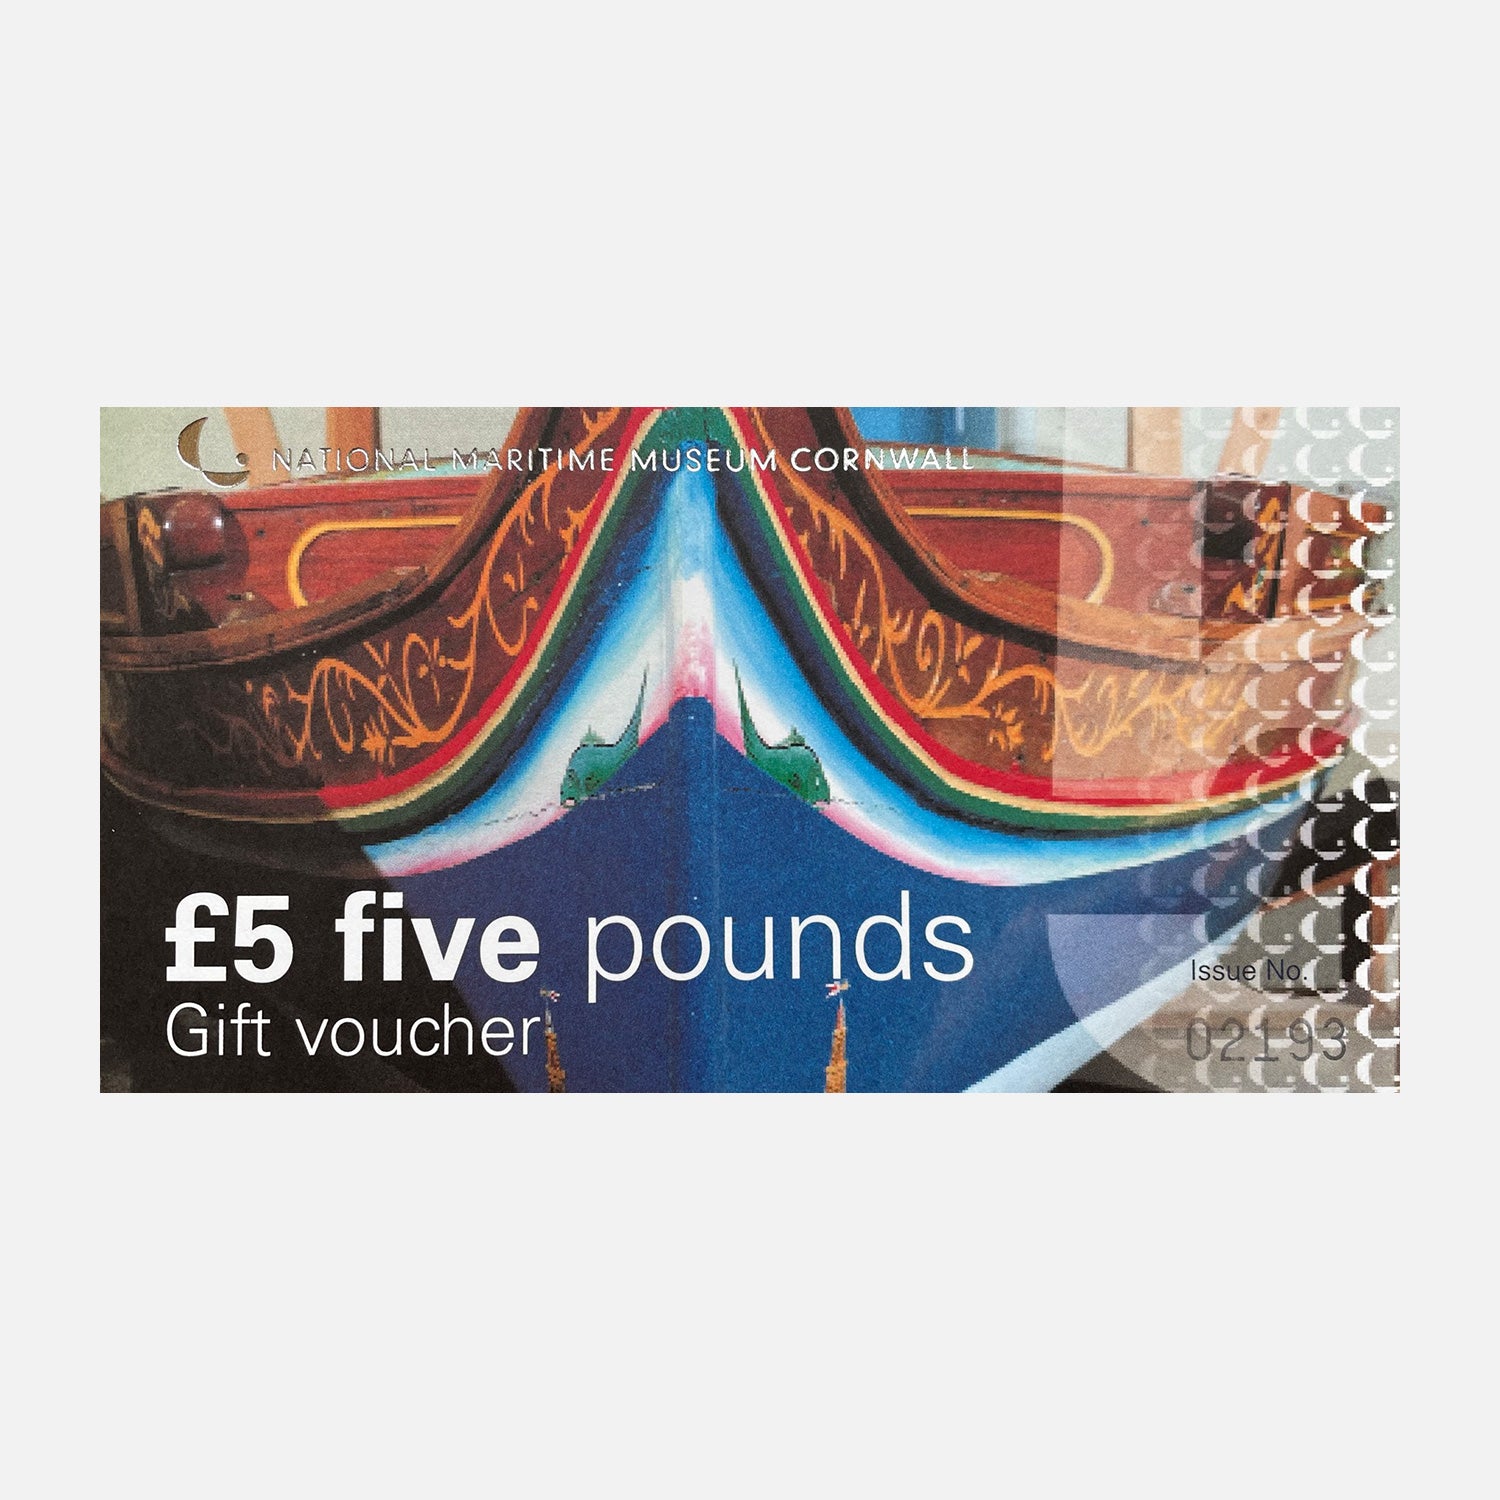 Colourful image of the museums £5 gift voucher